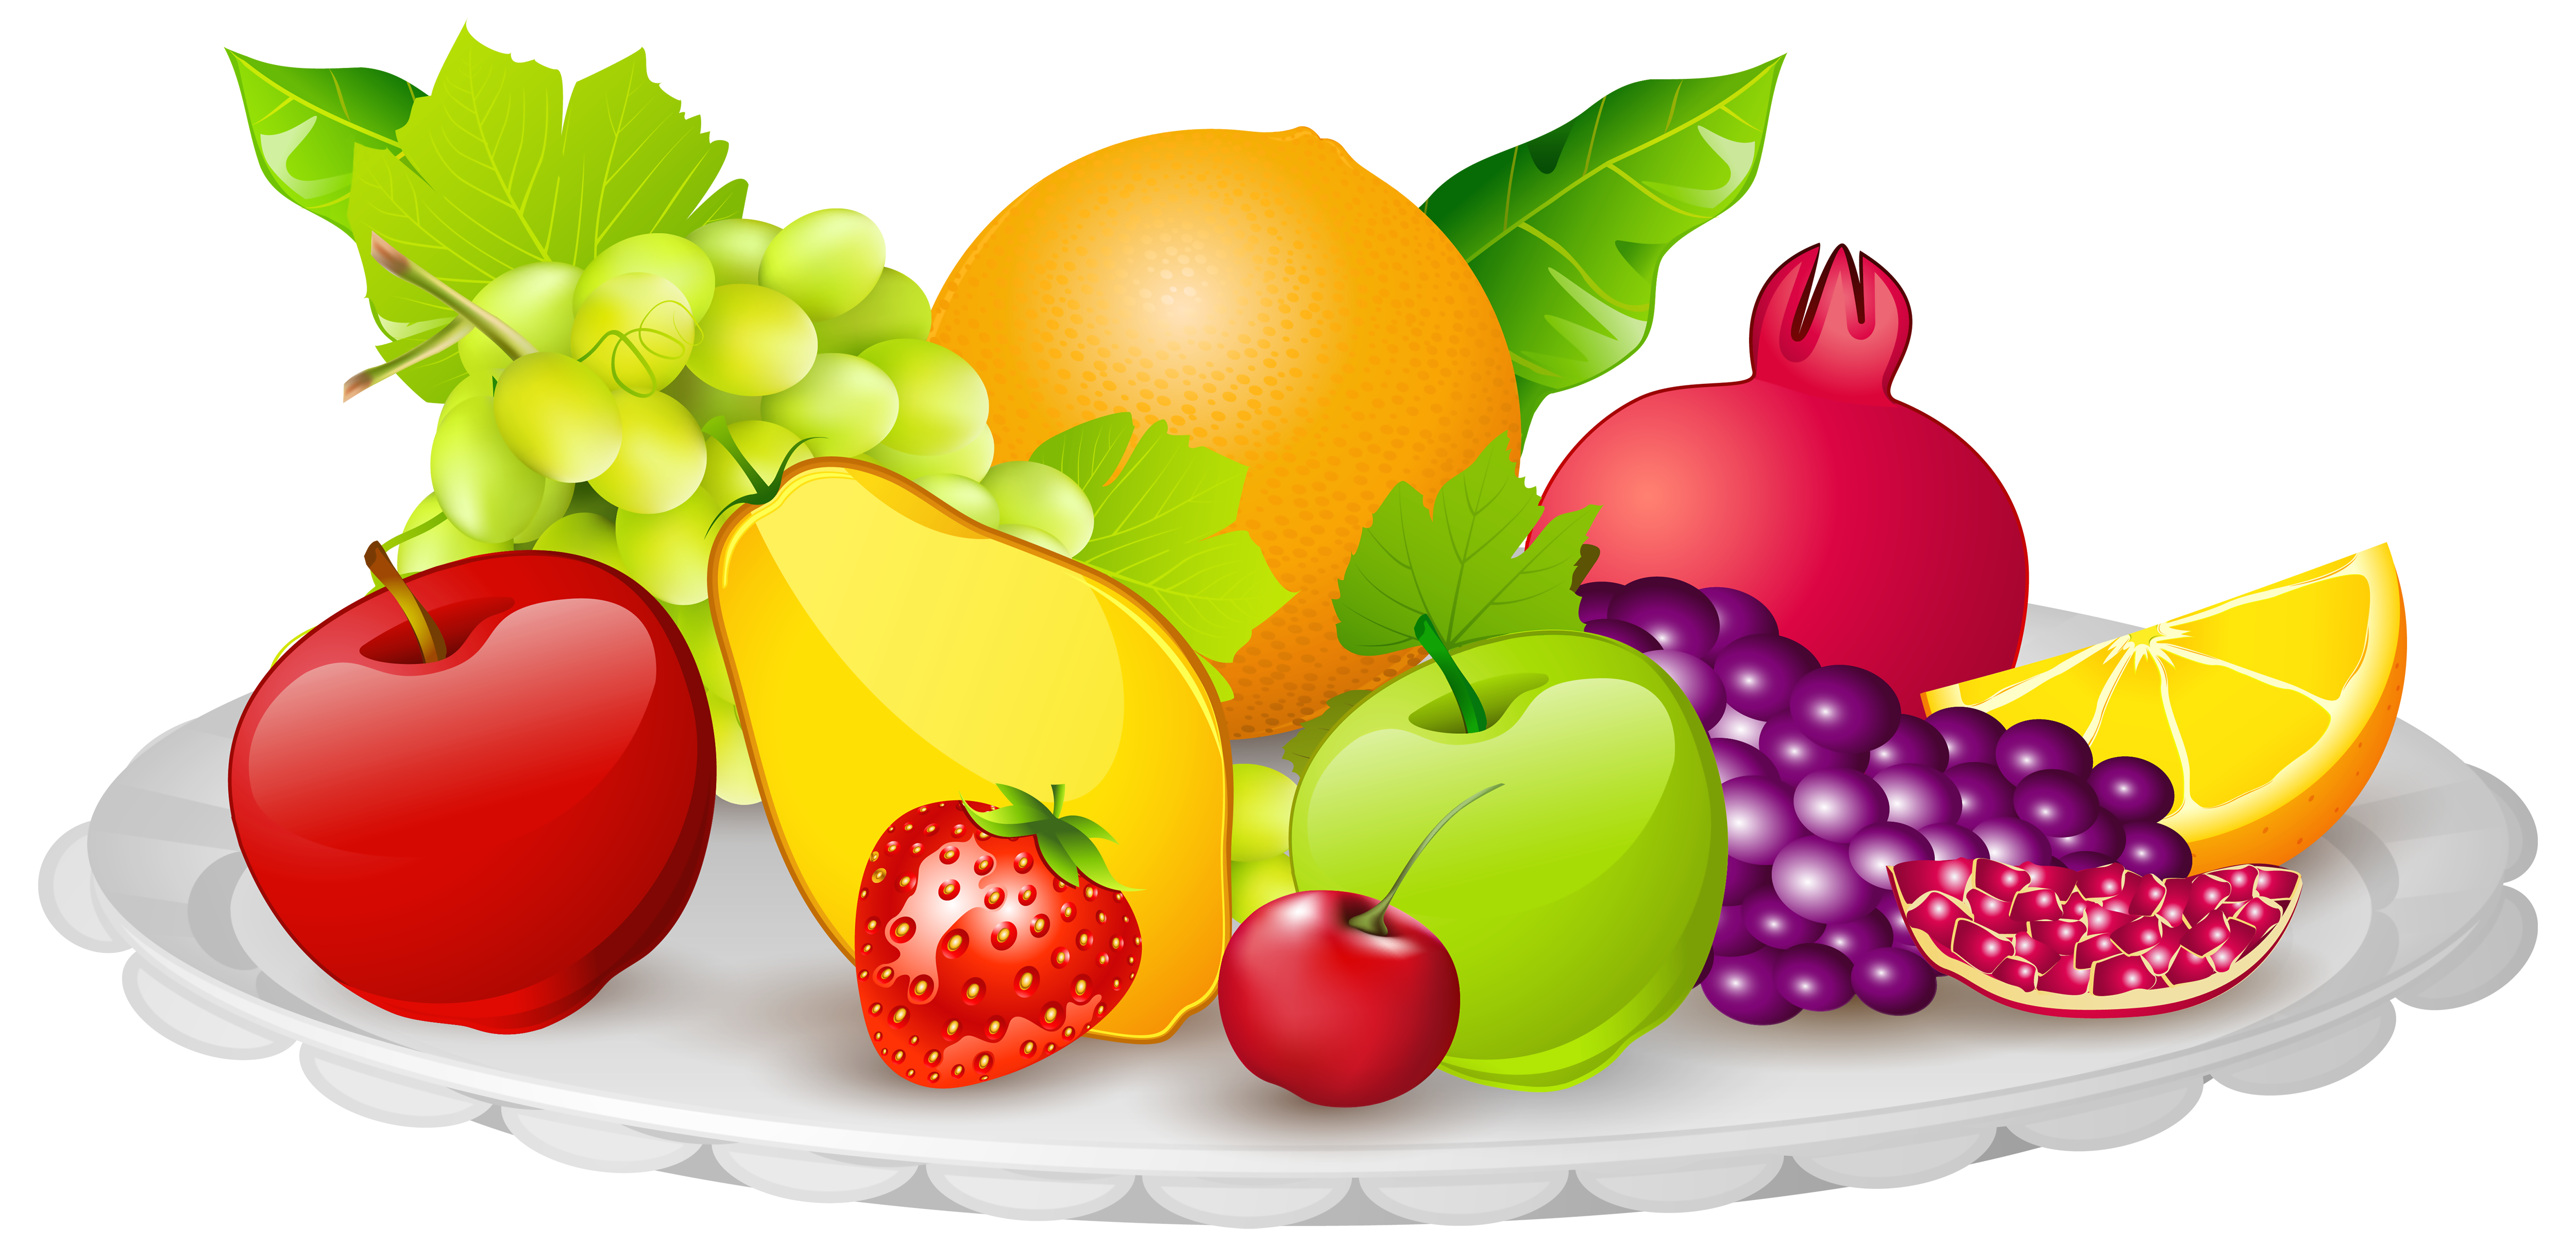 free clipart images of fruit - photo #42